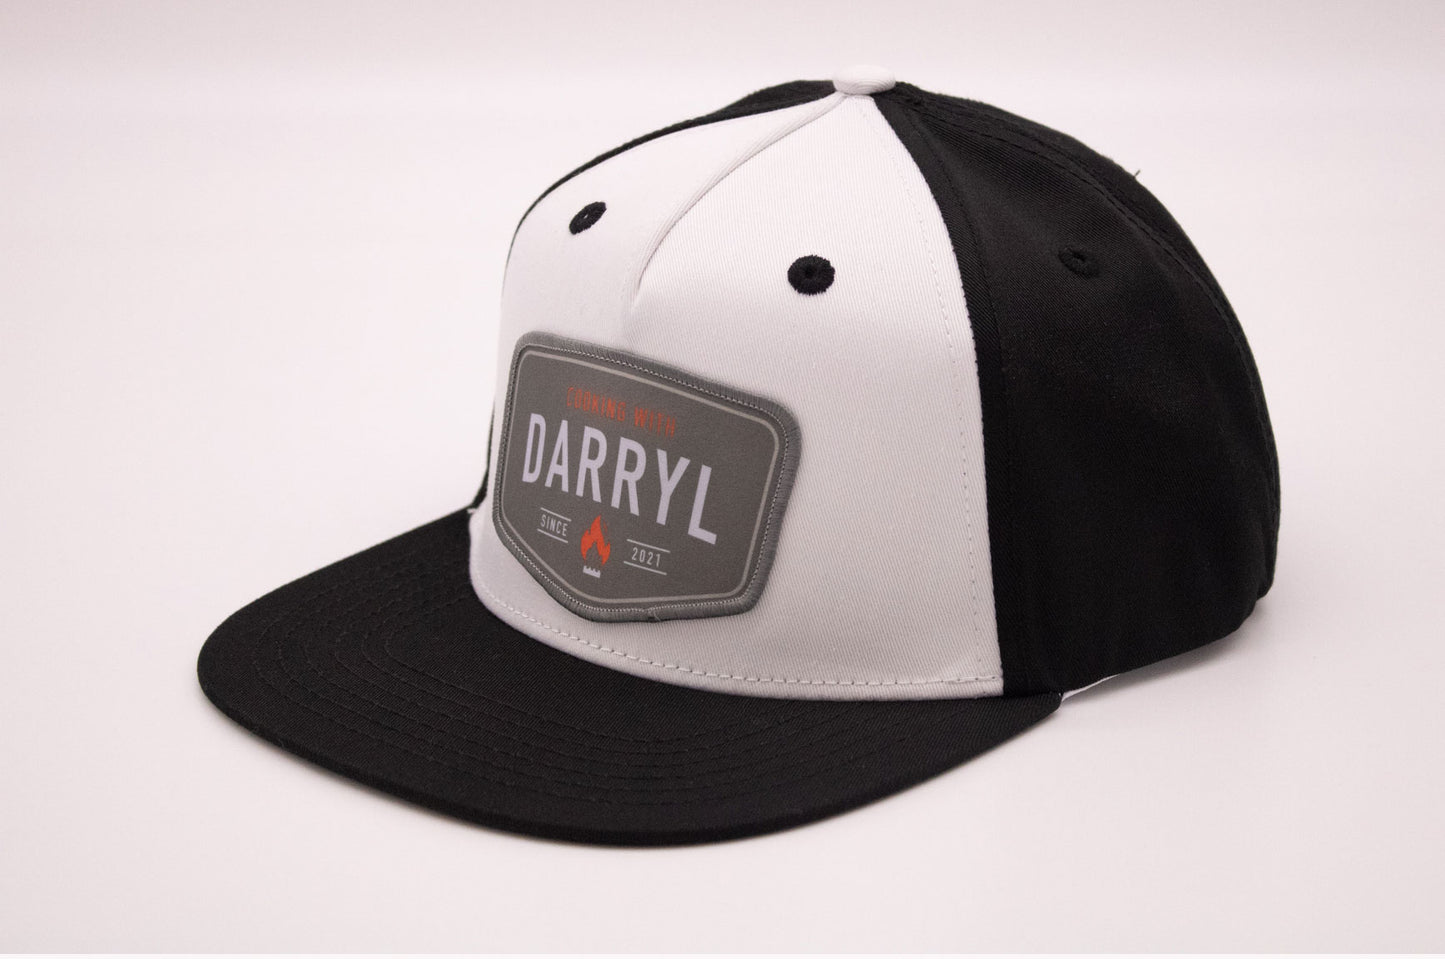 Cooking With Darryl Snapback Flatbill Hat - Black/White